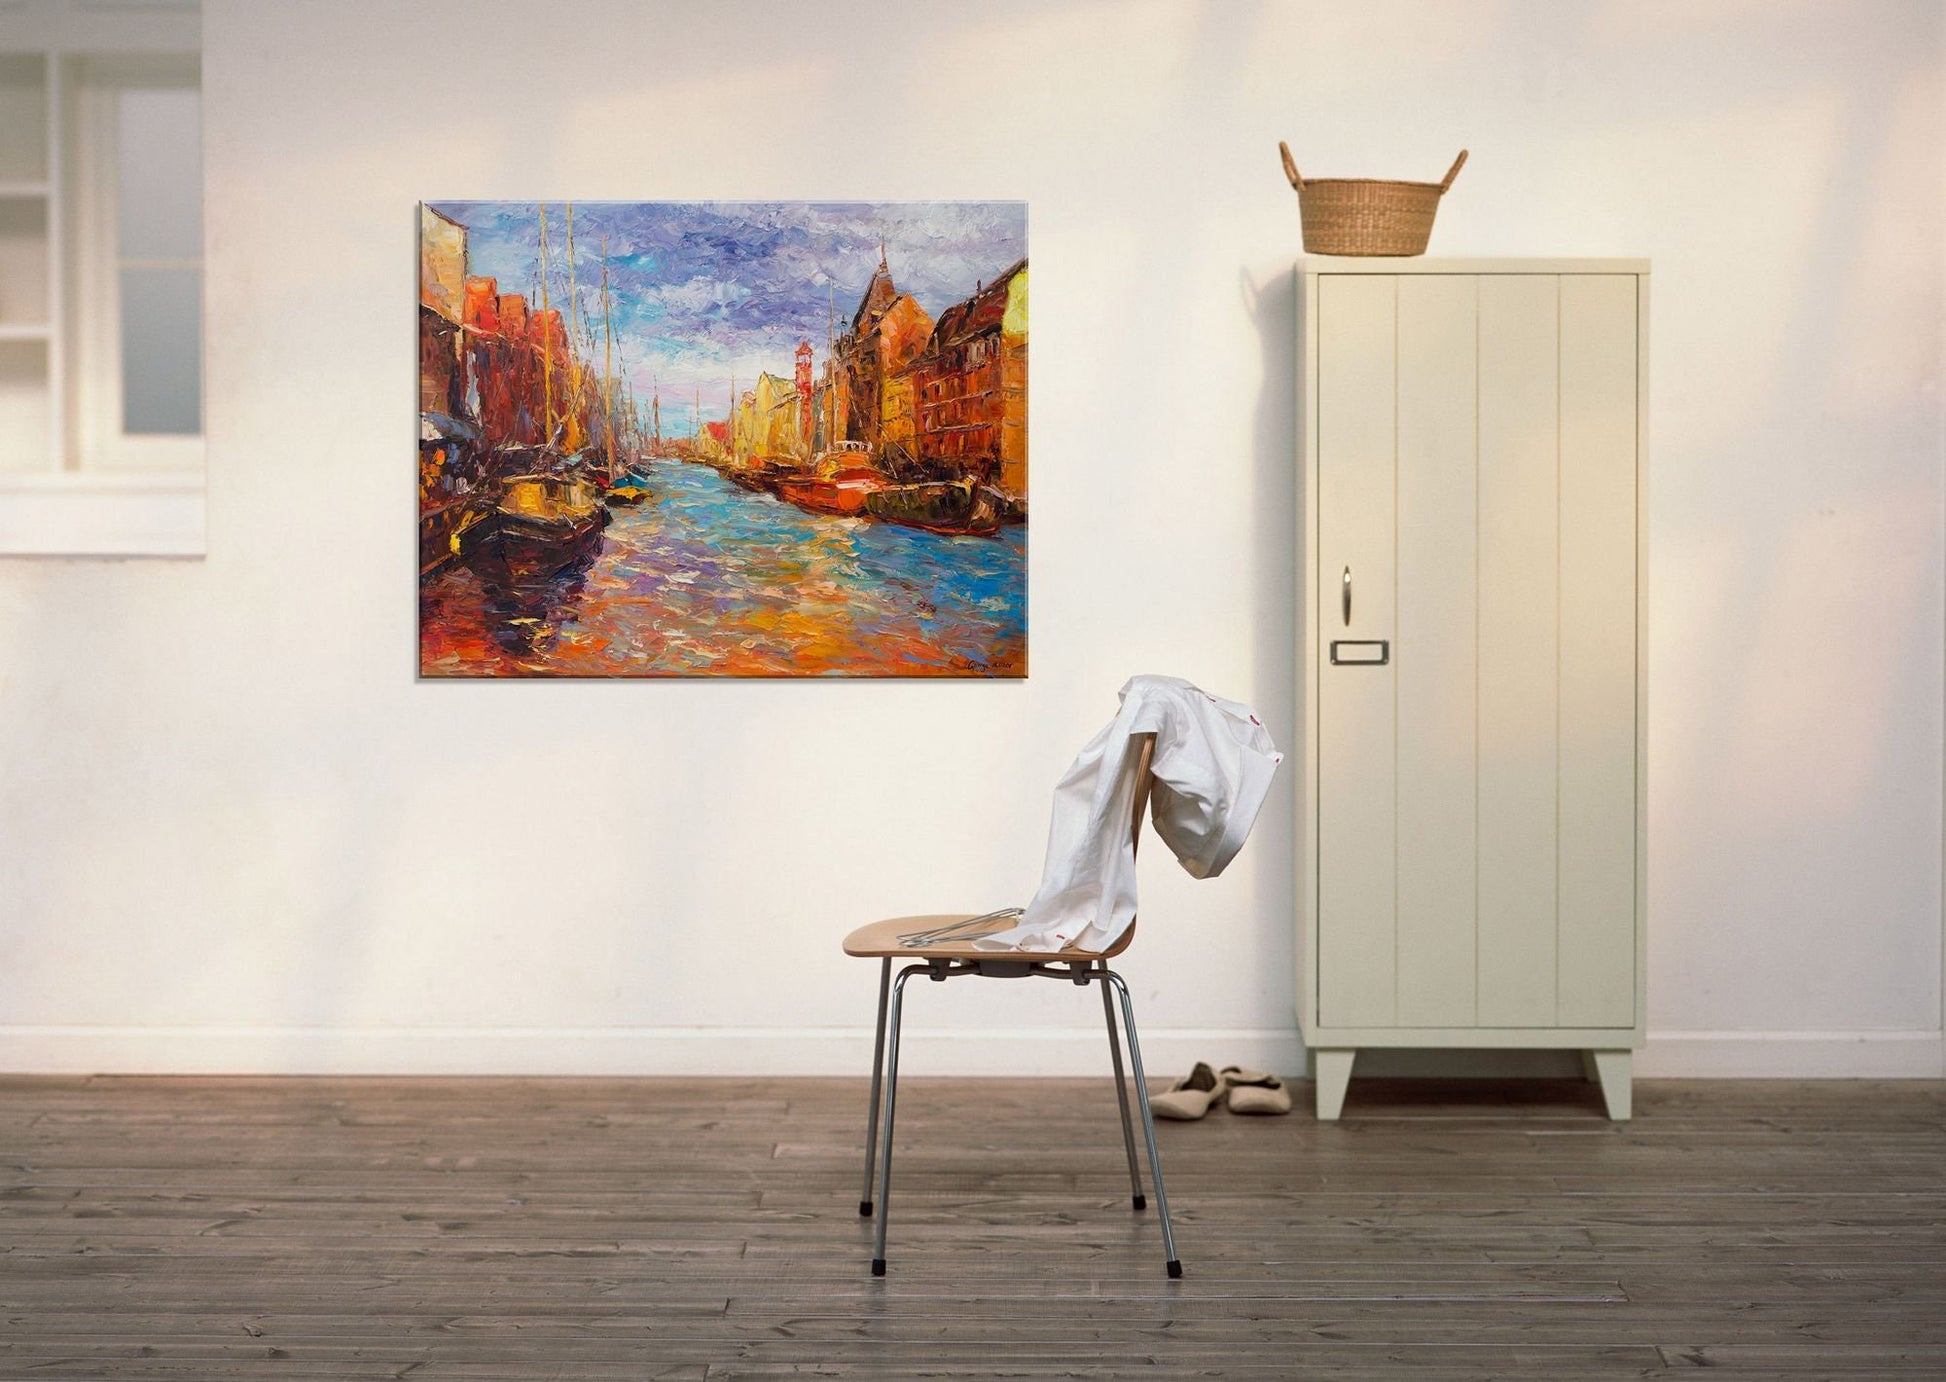 Oil Painting Amsterdam Canal Boats, Abstract Painting, Canvas Painting, Contemporary Art, Living Room Decor, Large Landscape Painting